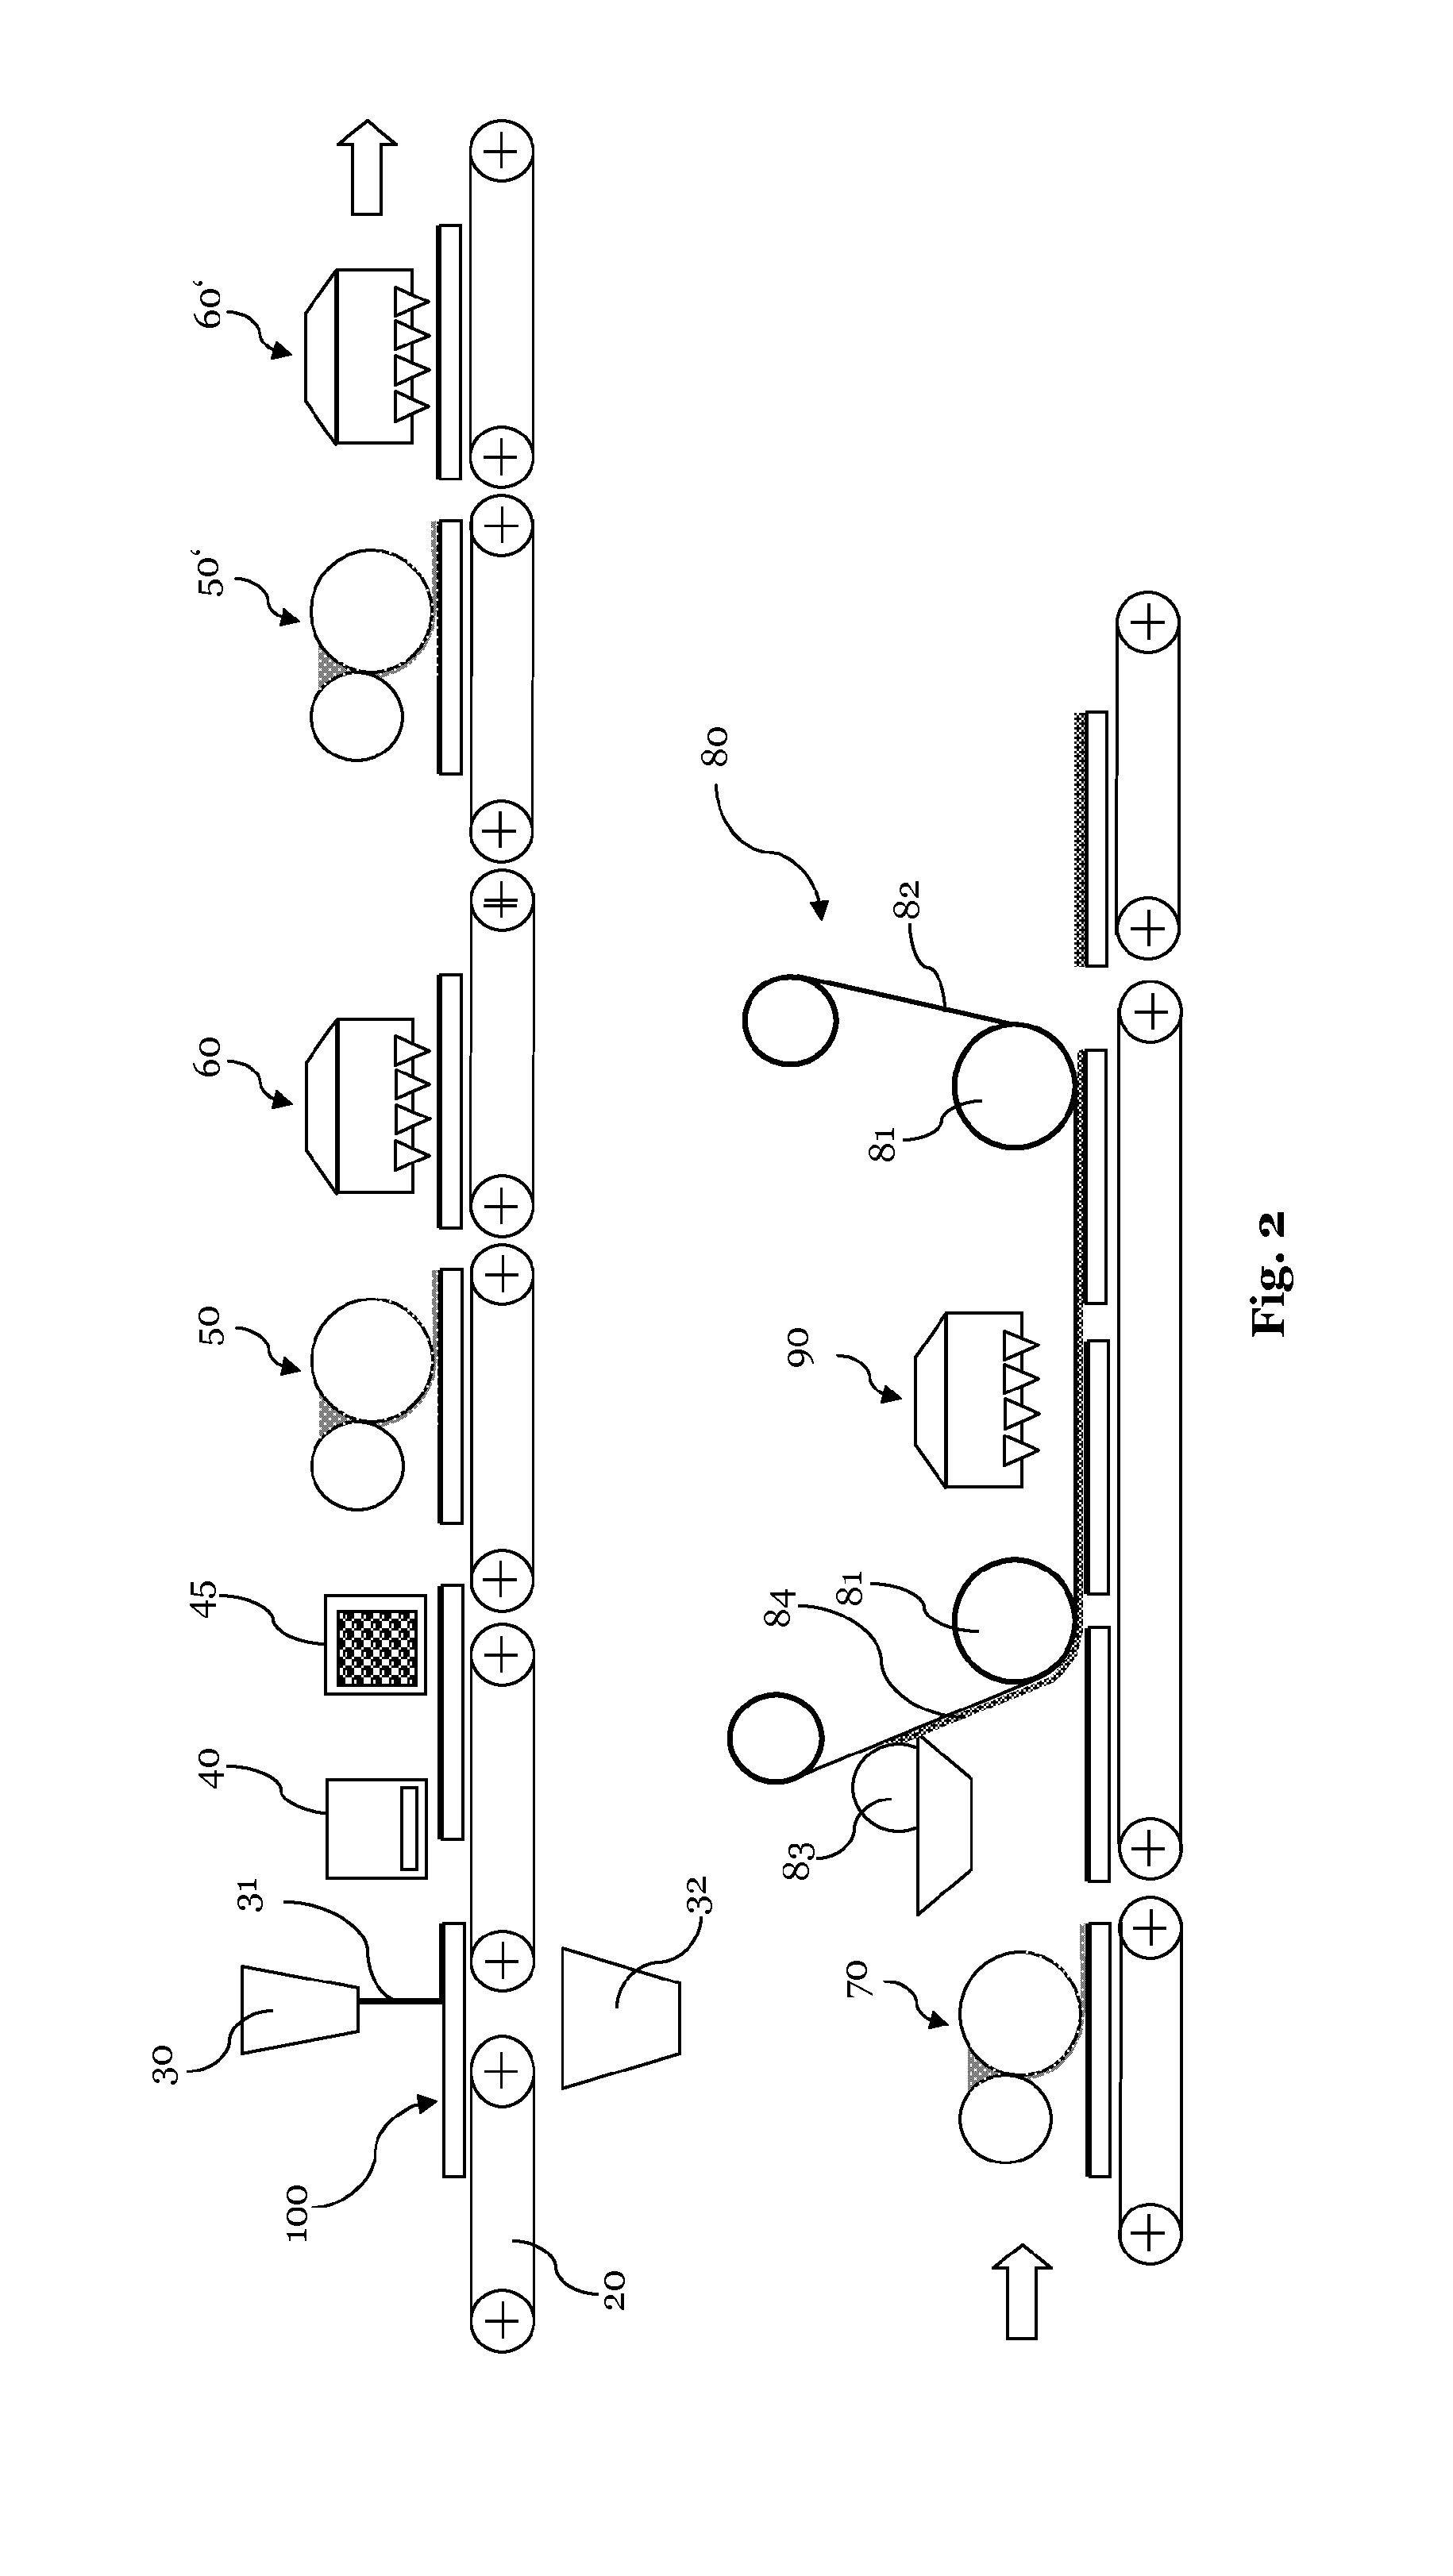 Method for producing a directly printed panel